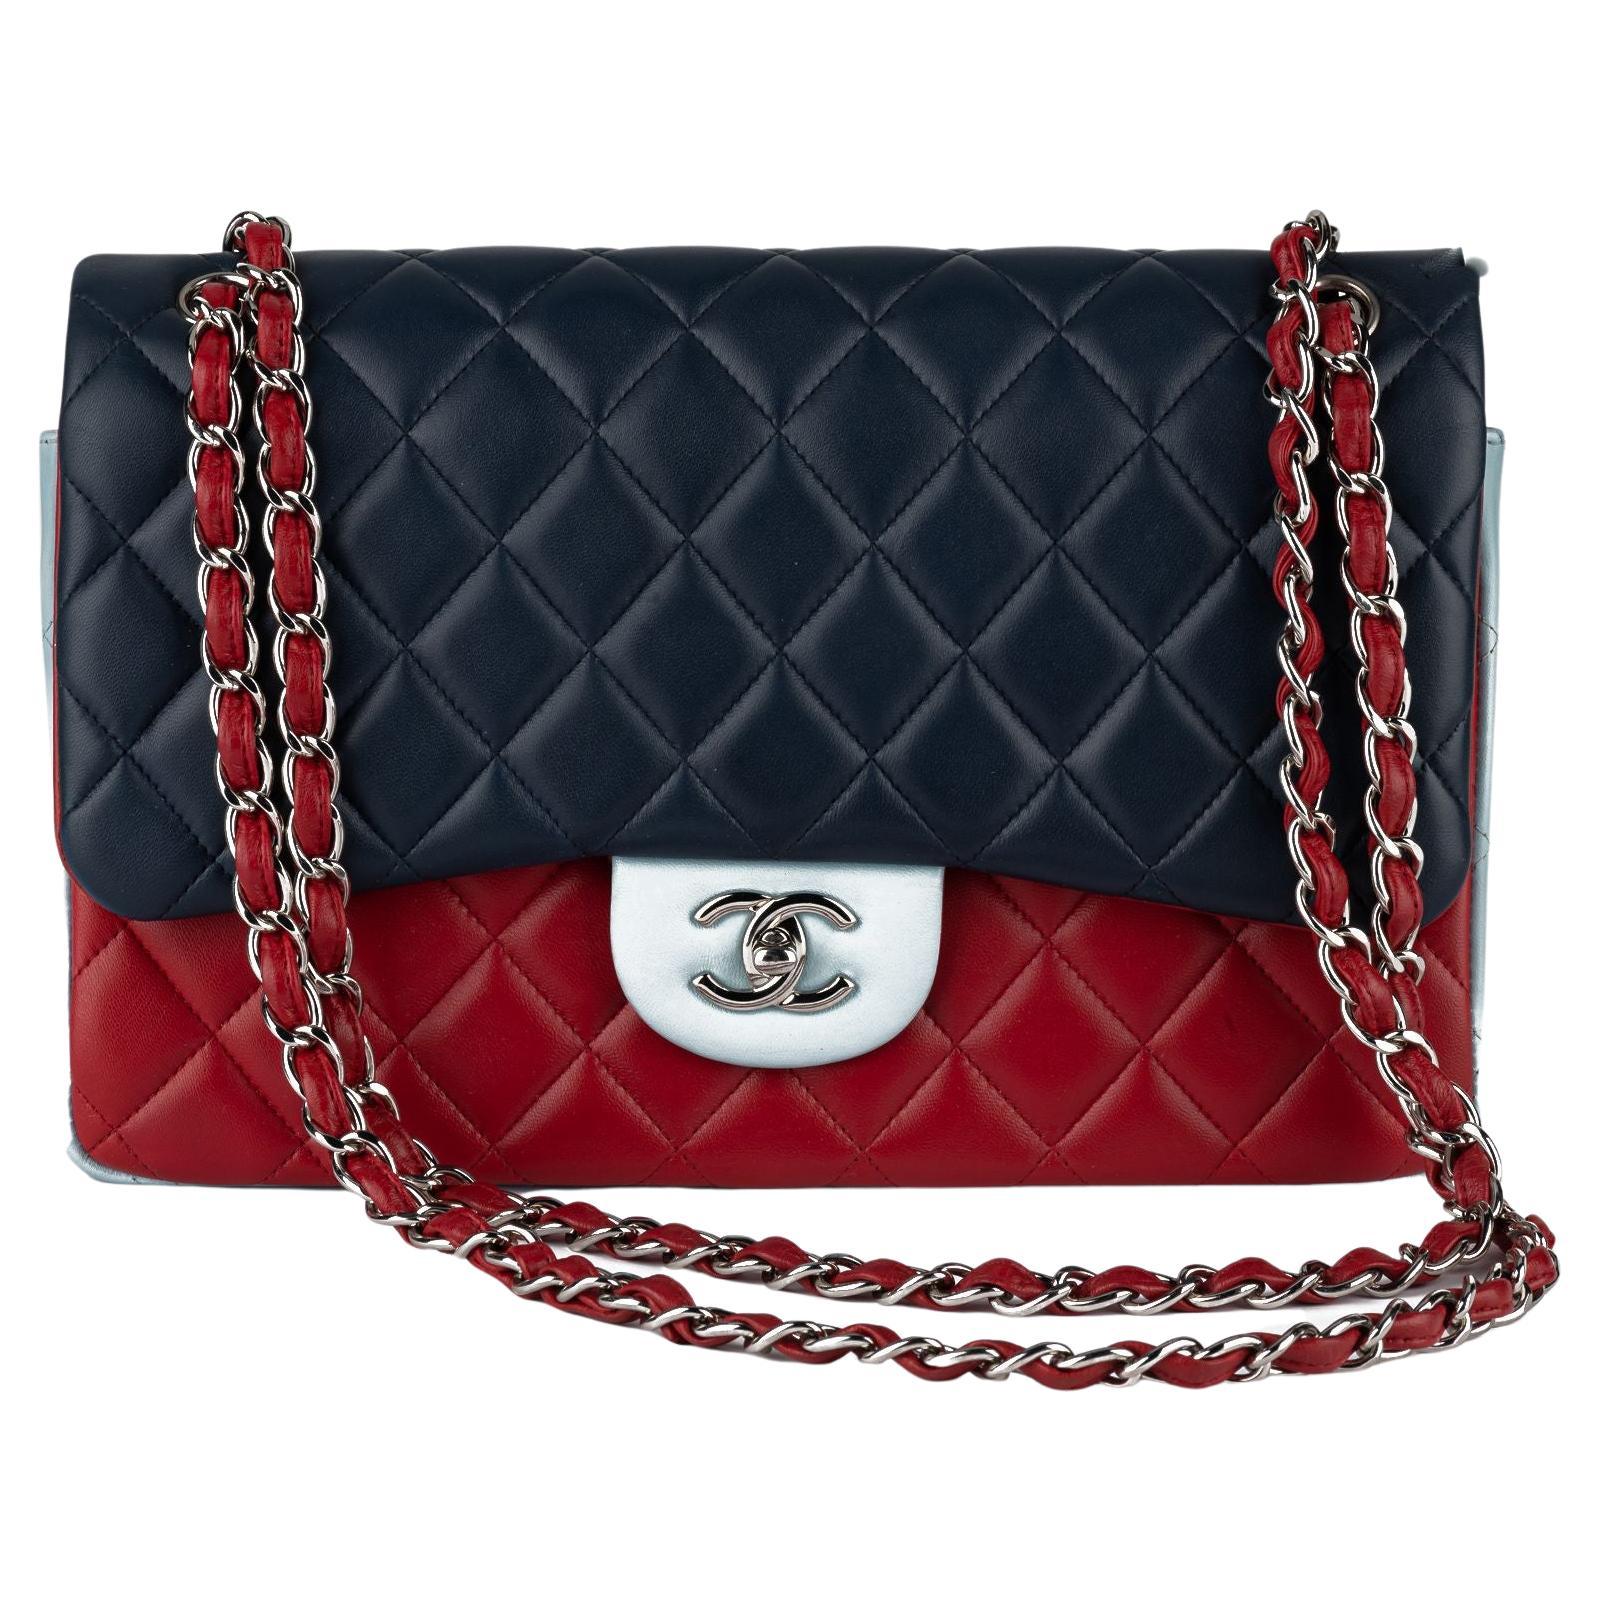 Chanel Tricolor - 11 For Sale on 1stDibs